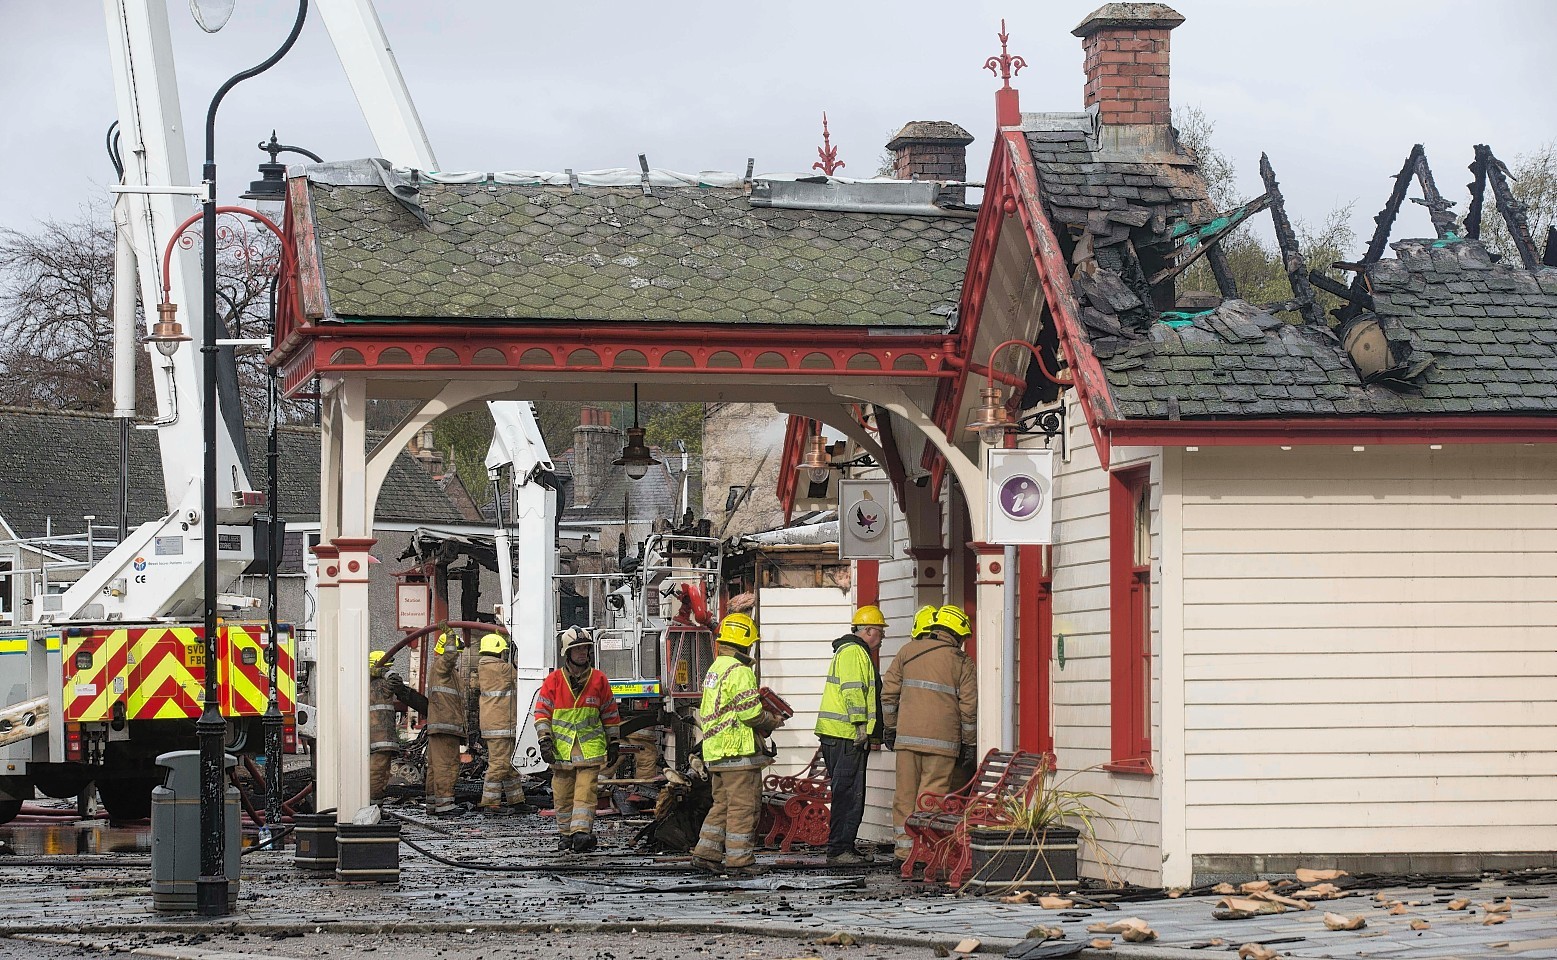 The old railway station in Ballater has been ruined by the fire